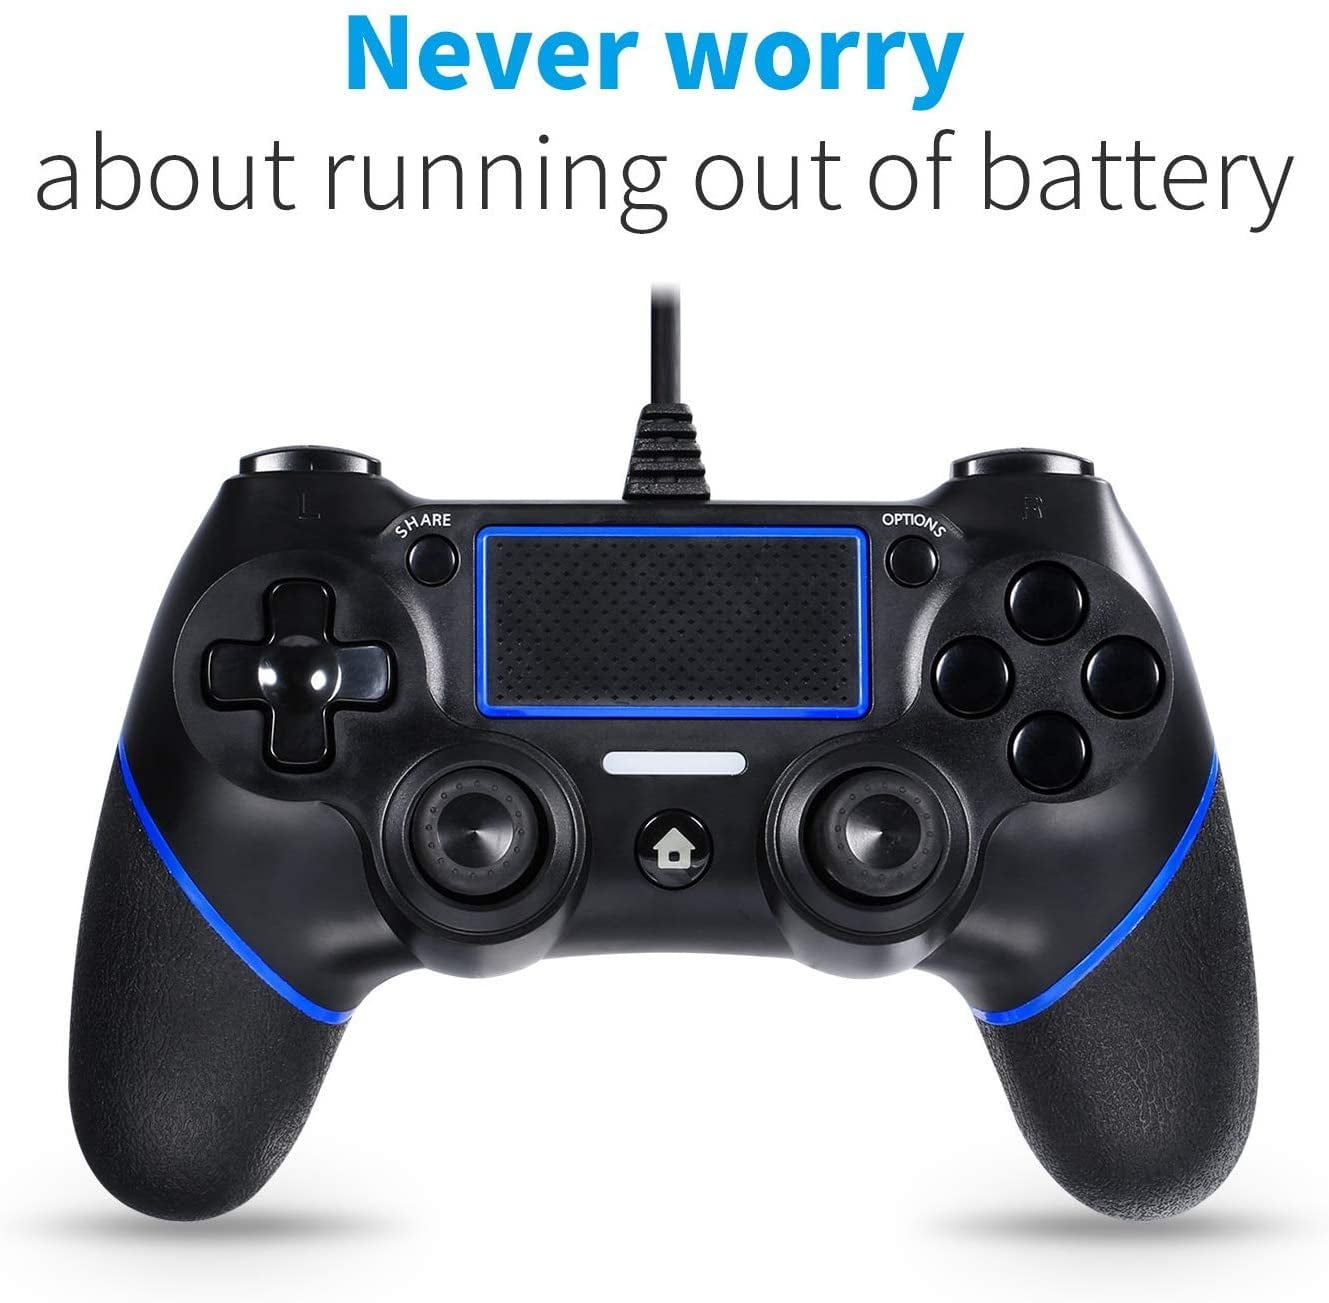 Fest eftertiden Slette Wired Controller for Playstation 4, Professional USB PS4 Wired Gamepad -  Walmart.com